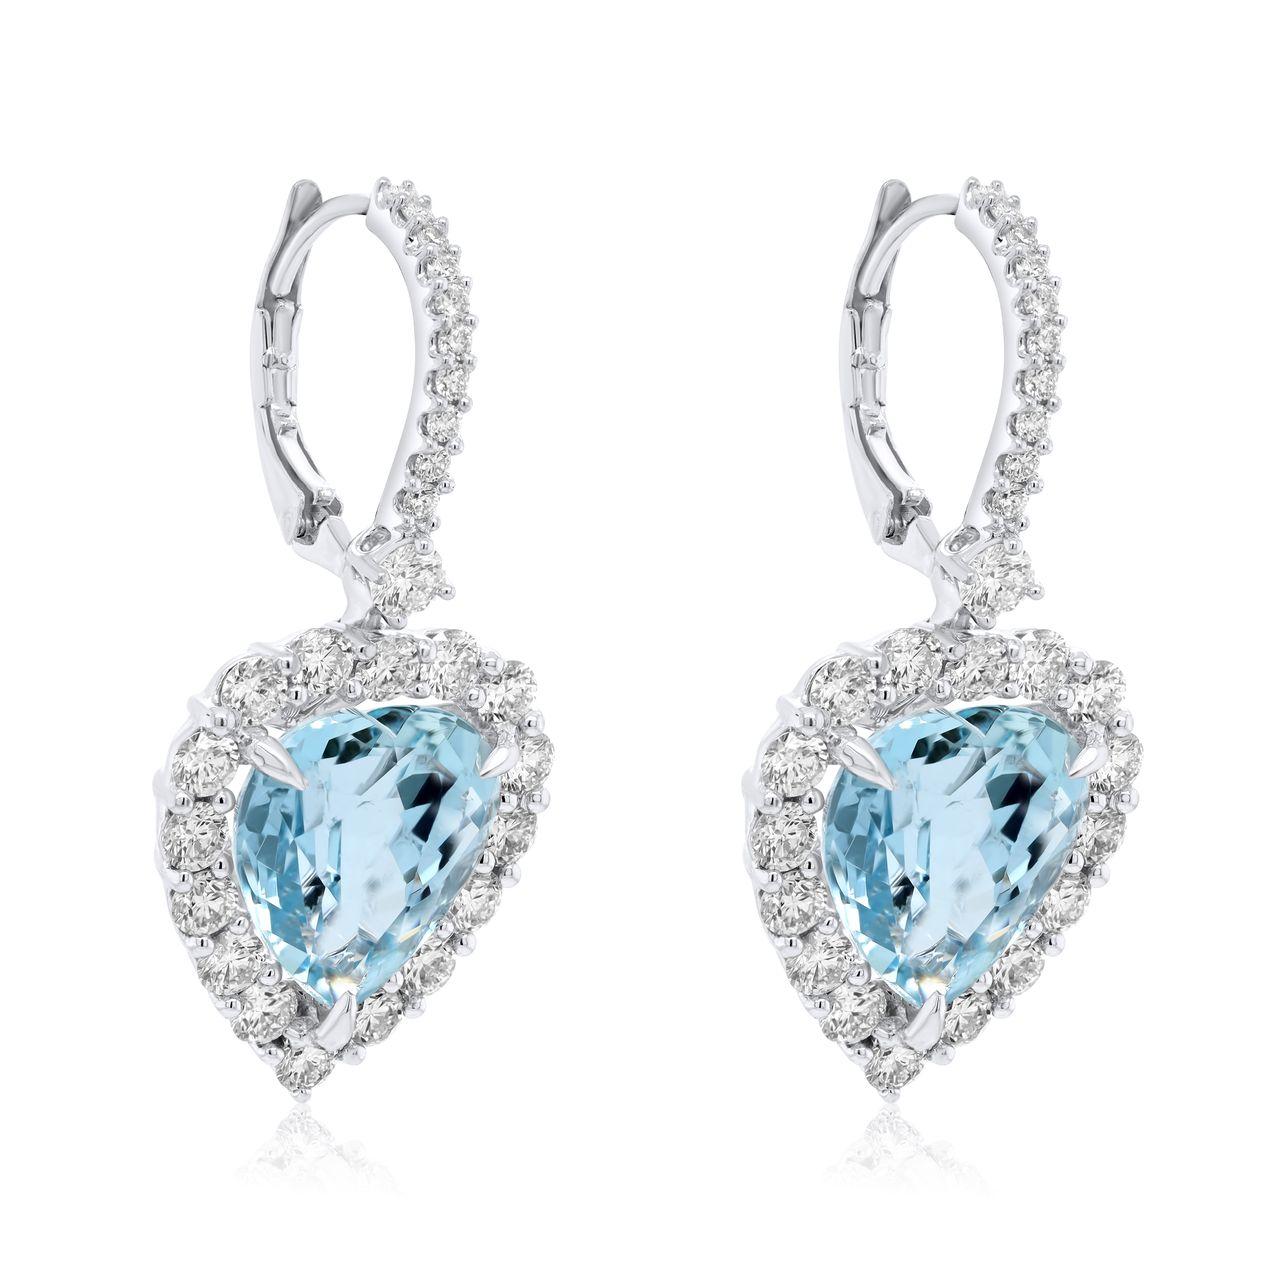 18kt white gold fashion earring 2 pcs Aquamarine heart center stone 8.15cts with 2pcs marquise 0.26cts and 48 stone 2.40cts Diamonds around